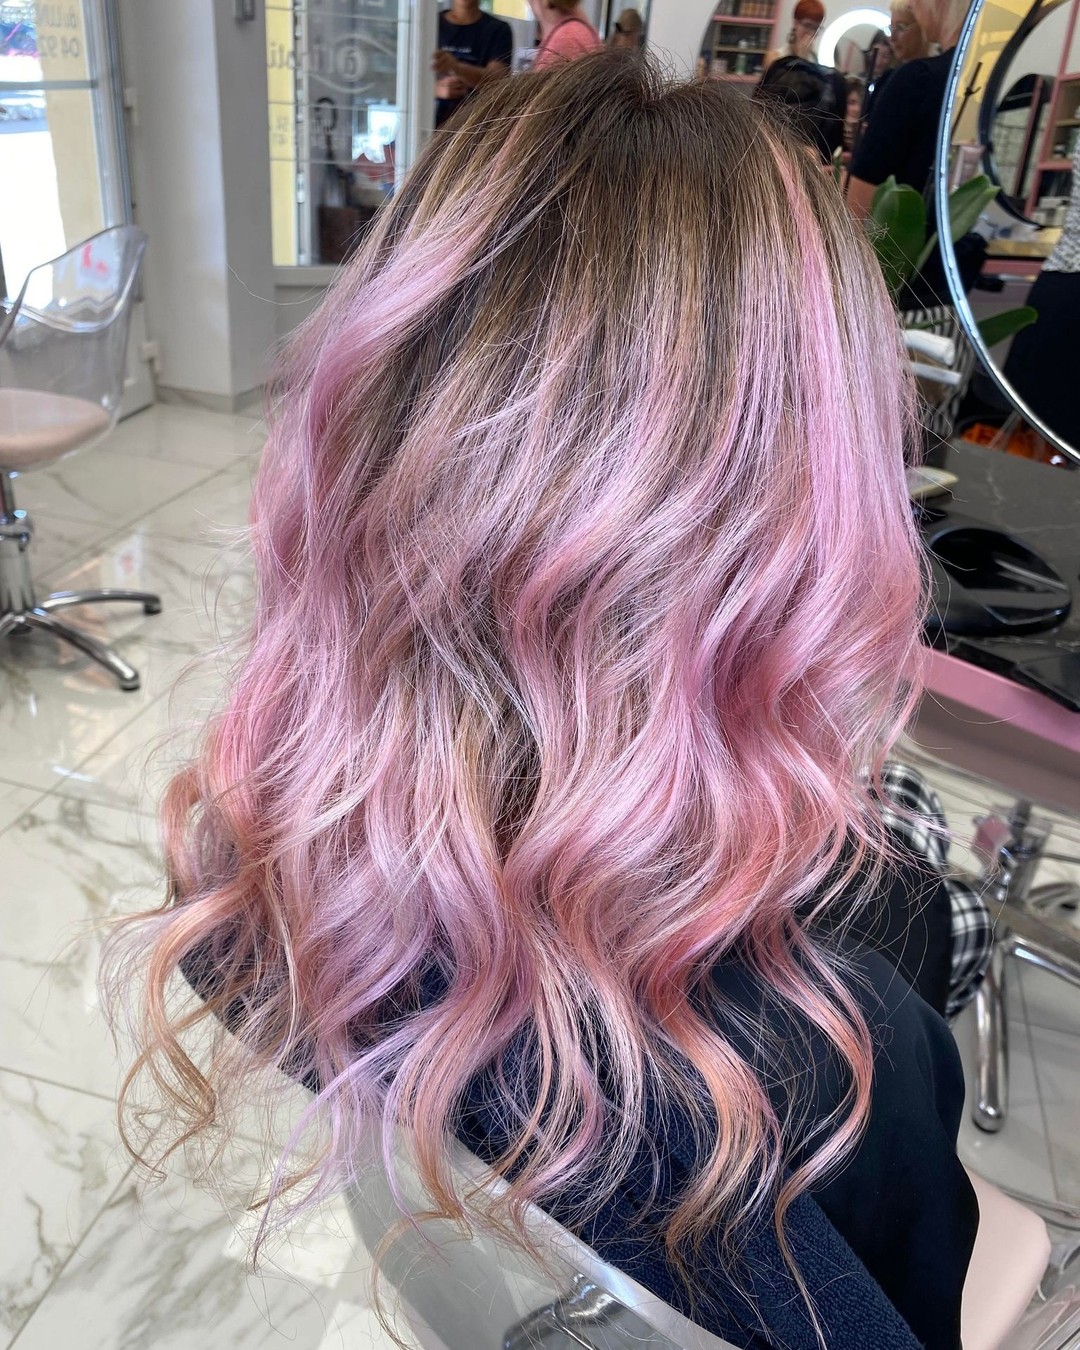 pink ombre hair color 39 Ombre pink hair blonde | Pastel pink ombre hair | Pink balayage Hair Pink Ombre Hair Color for Women